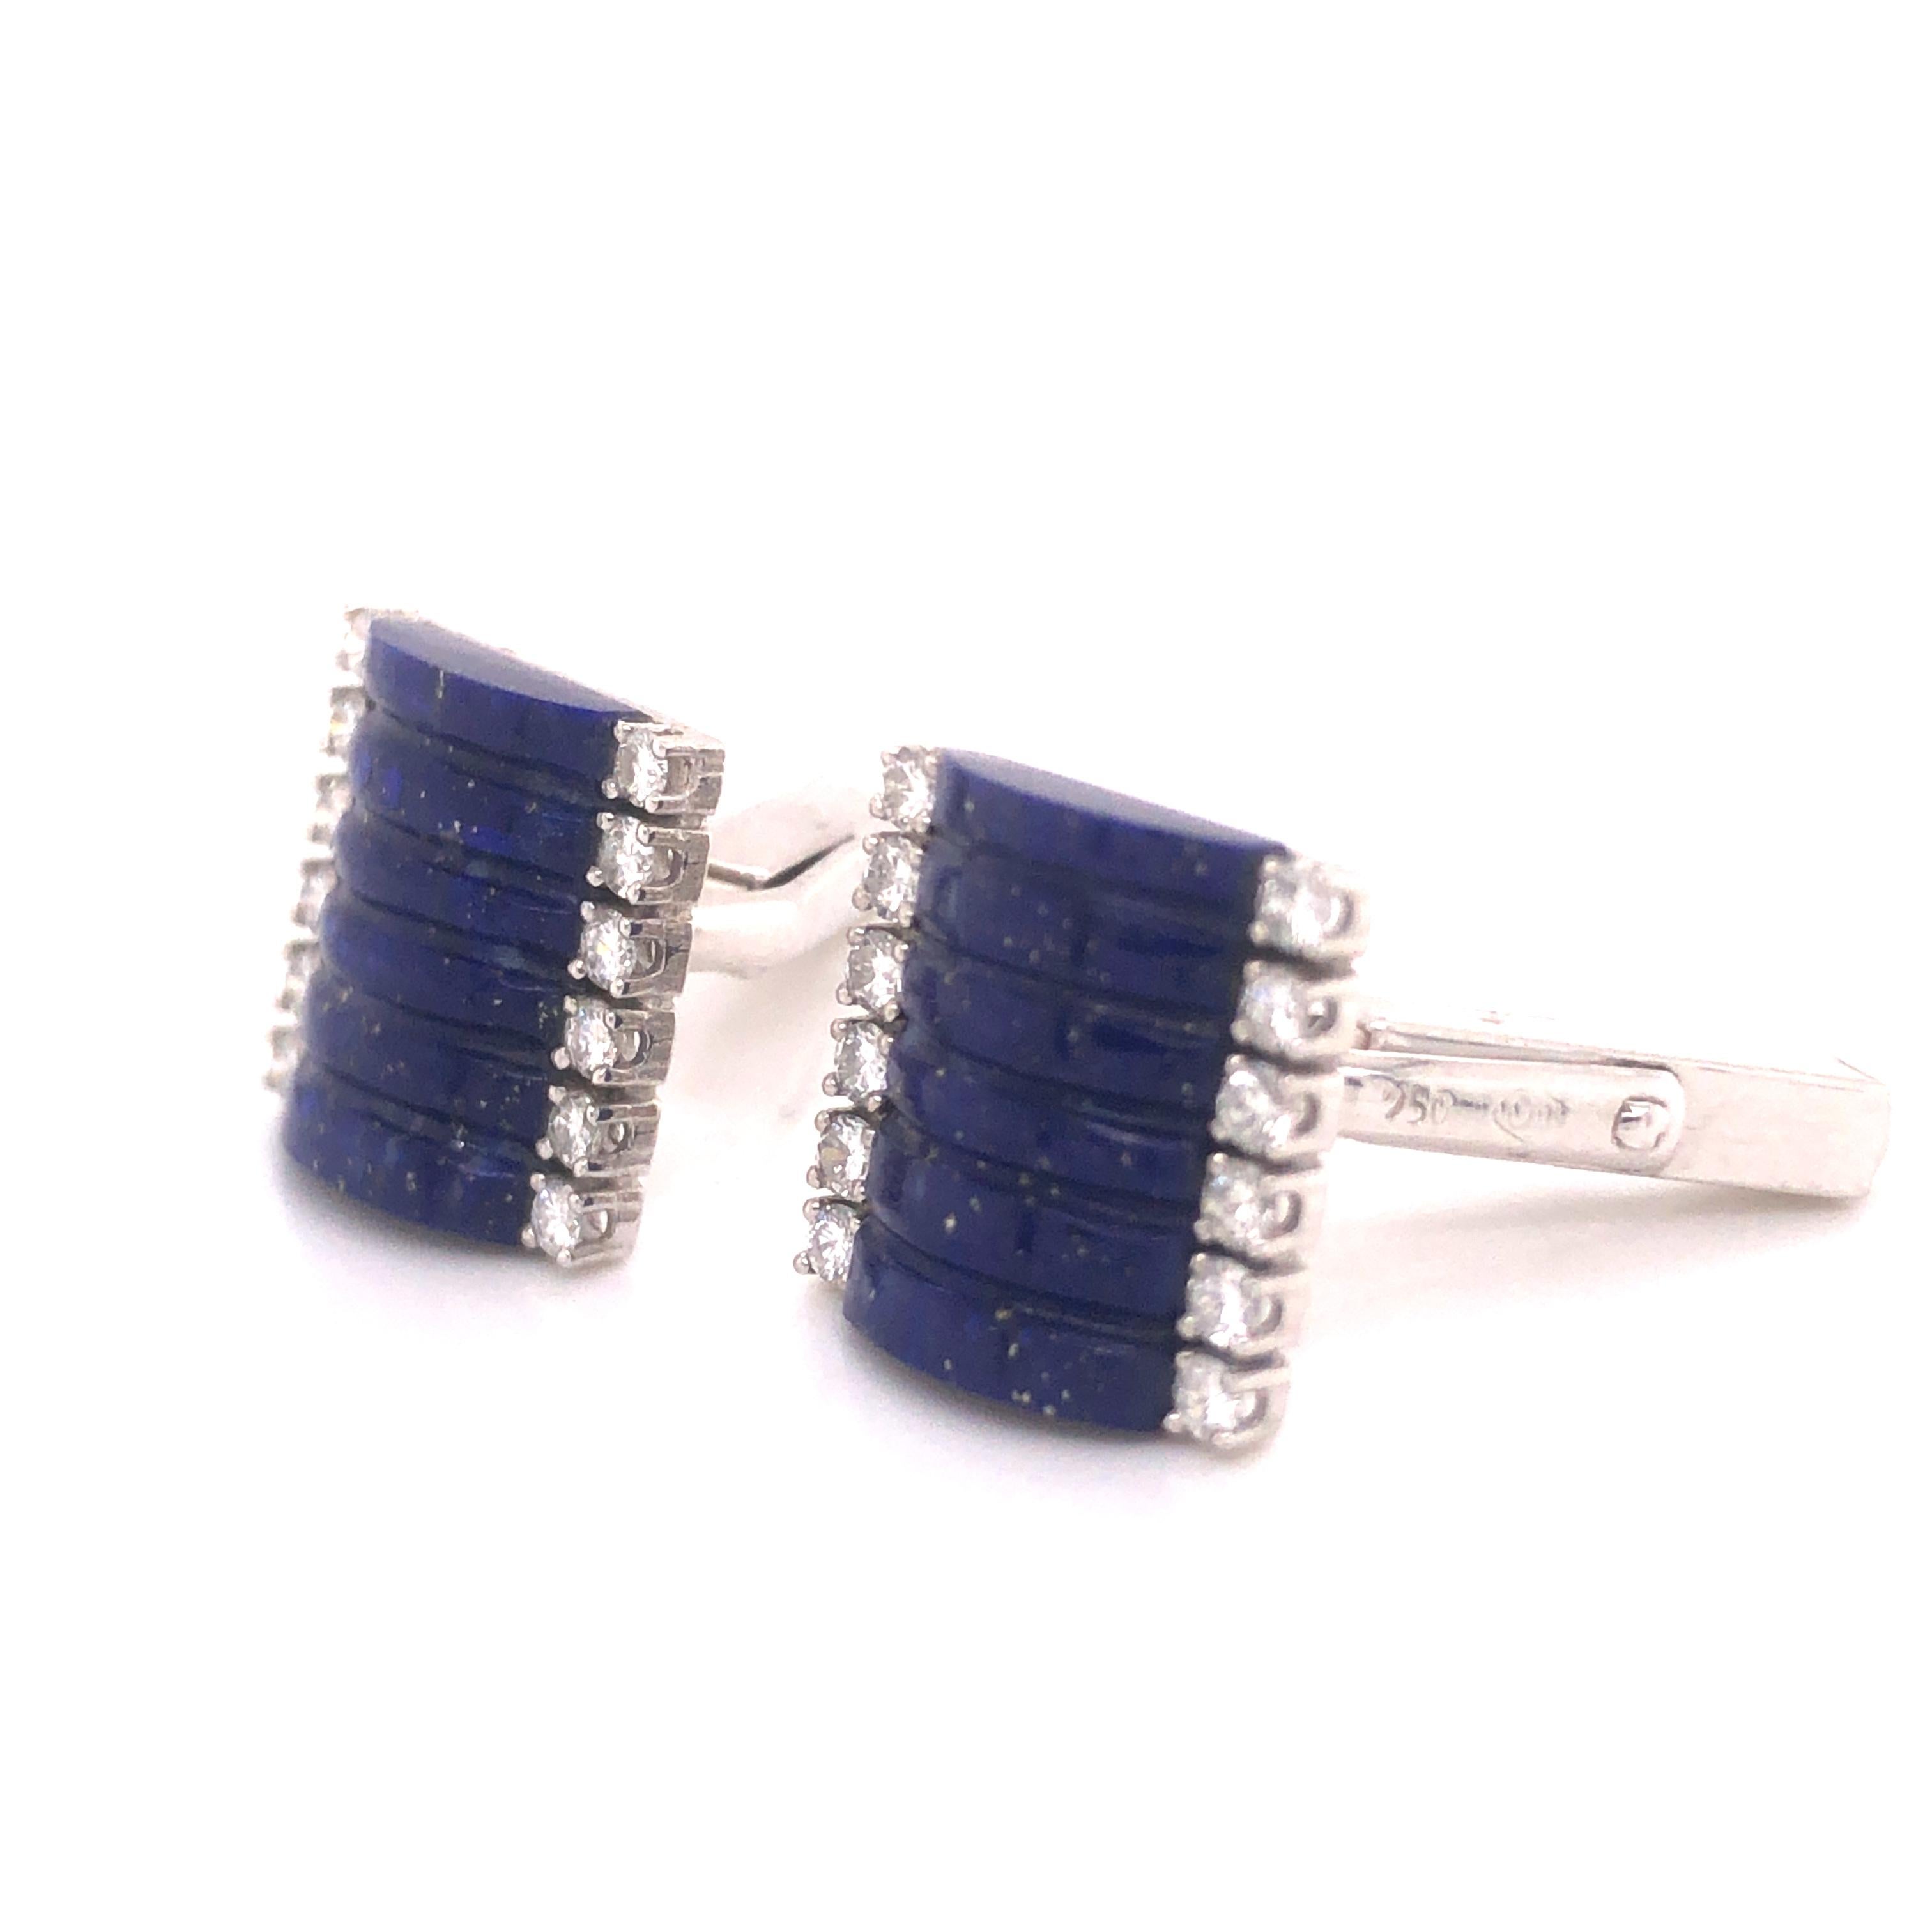 AmazIng design of this one of a kind pair of mens cufflinks. Crafted by famed designer H. Stern. Highlighting this  pair are carved lapis lazuli gemstones. The blue color is electric, accenting the lapis are round brilliant cut natural diamonds. 